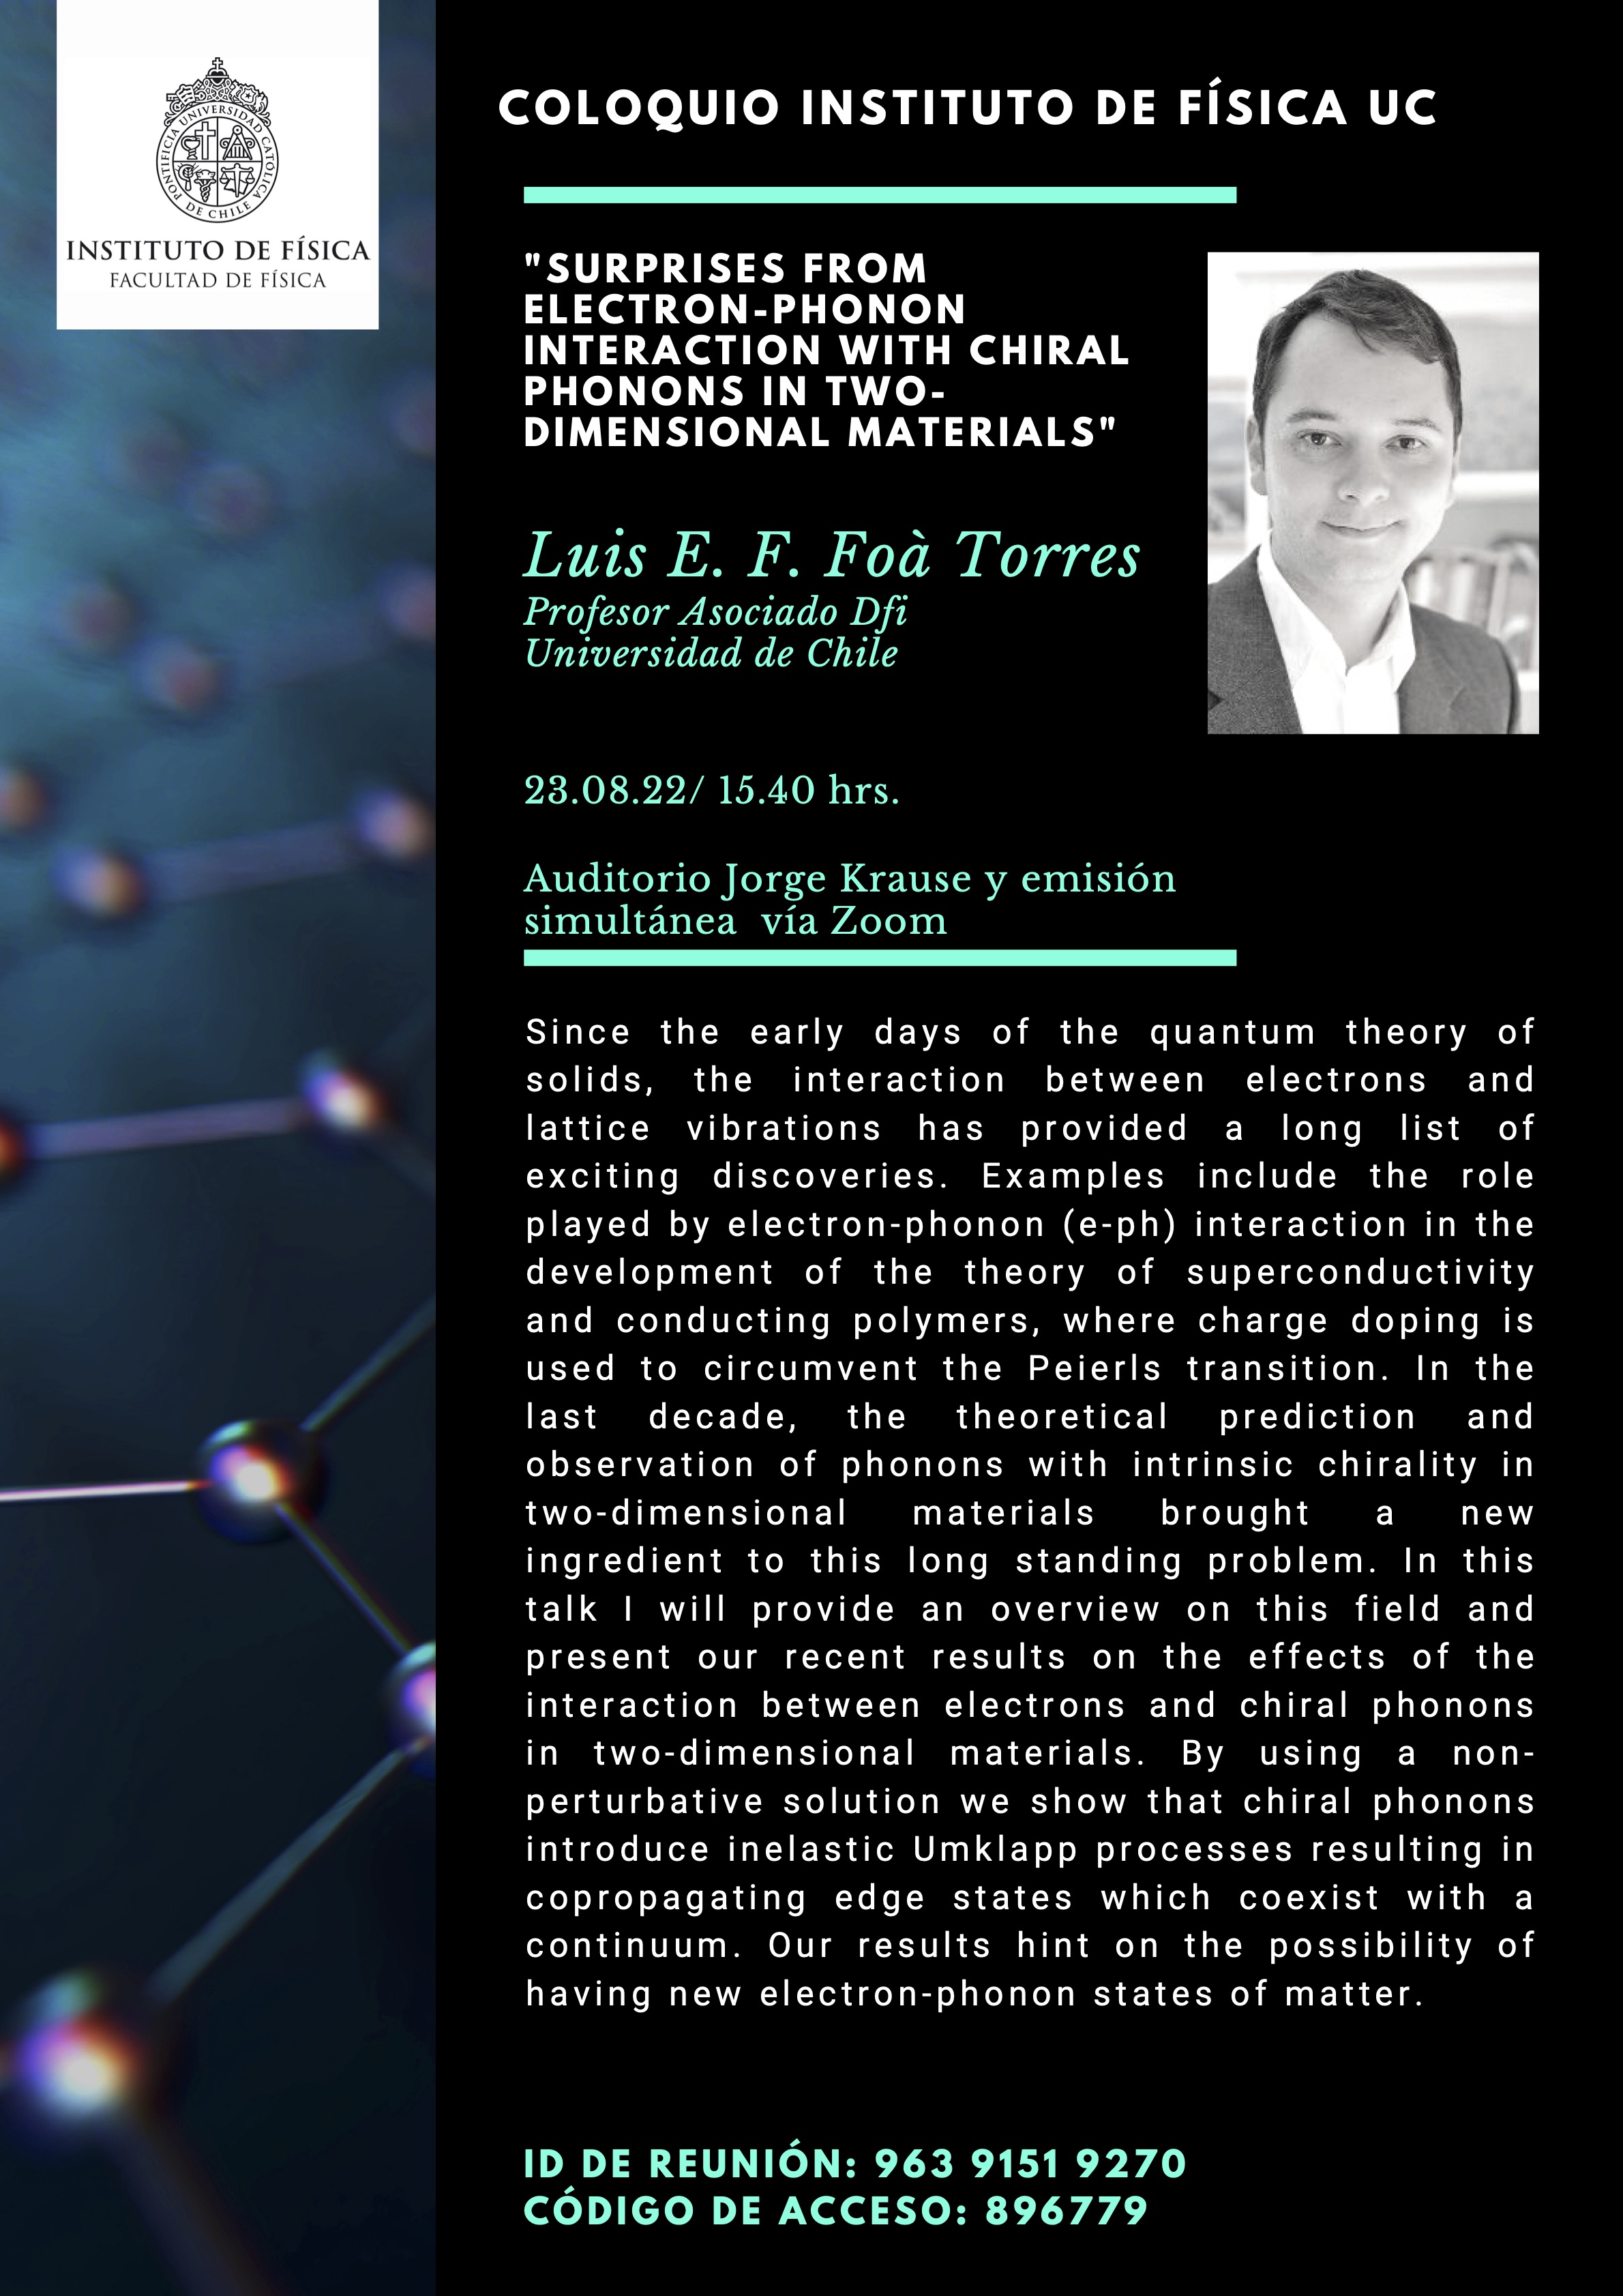 Próximo martes: coloquio &quot;Surprises from electron-phonon interaction with chiral phonons in two-dimensional materials&quot; por Luis E. F. Foà Torres